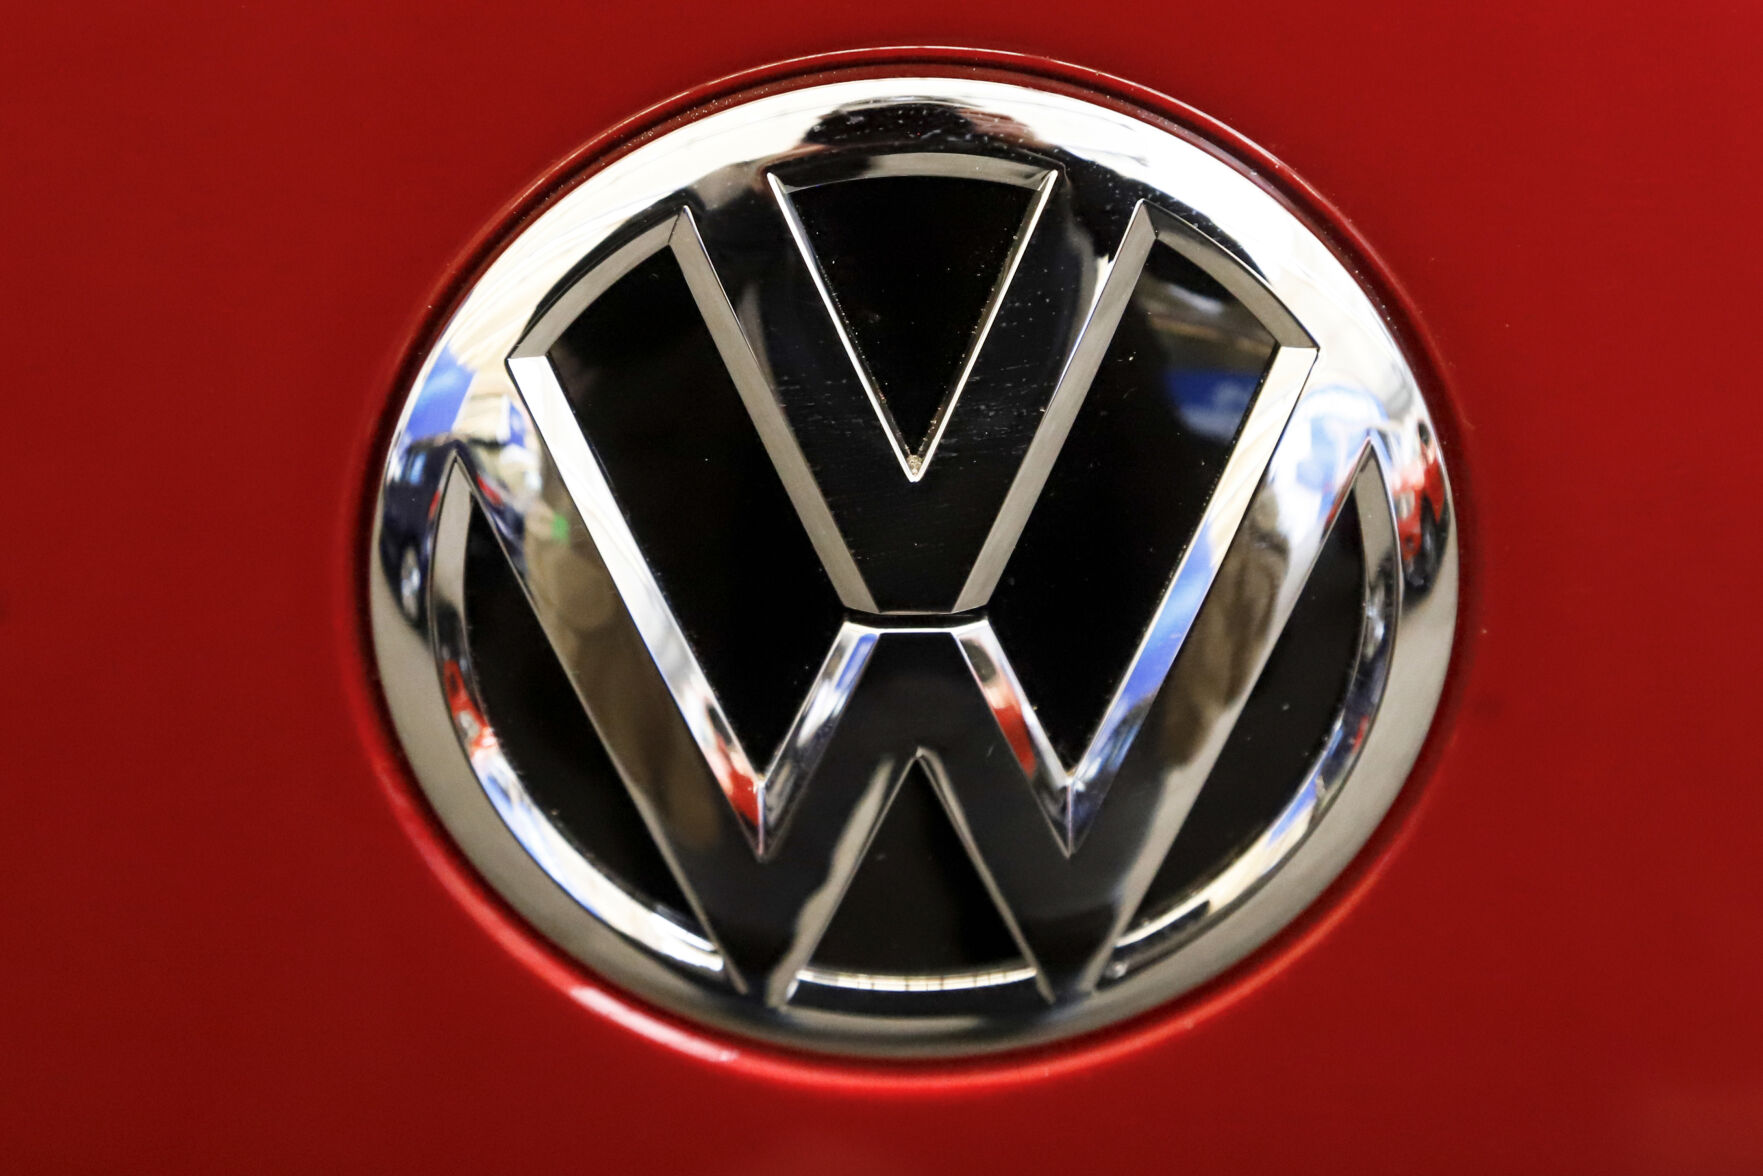 <p>FILE - This Thursday, Feb. 14, 2019, file photo, shows the Volkswagen logo on an automobile at the 2019 Pittsburgh International Auto Show in Pittsburgh. Volkswagen is recalling nearly 42,000 Beetles in the U.S. and Canada, Friday, Dec. 30, 2022, because they have potentially dangerous Takata air bag inflators. The recall covers Beetles from the 2015 and 2016 model years. (AP Photo/Gene J. Puskar, File)</p>   PHOTO CREDIT: The Associated Press